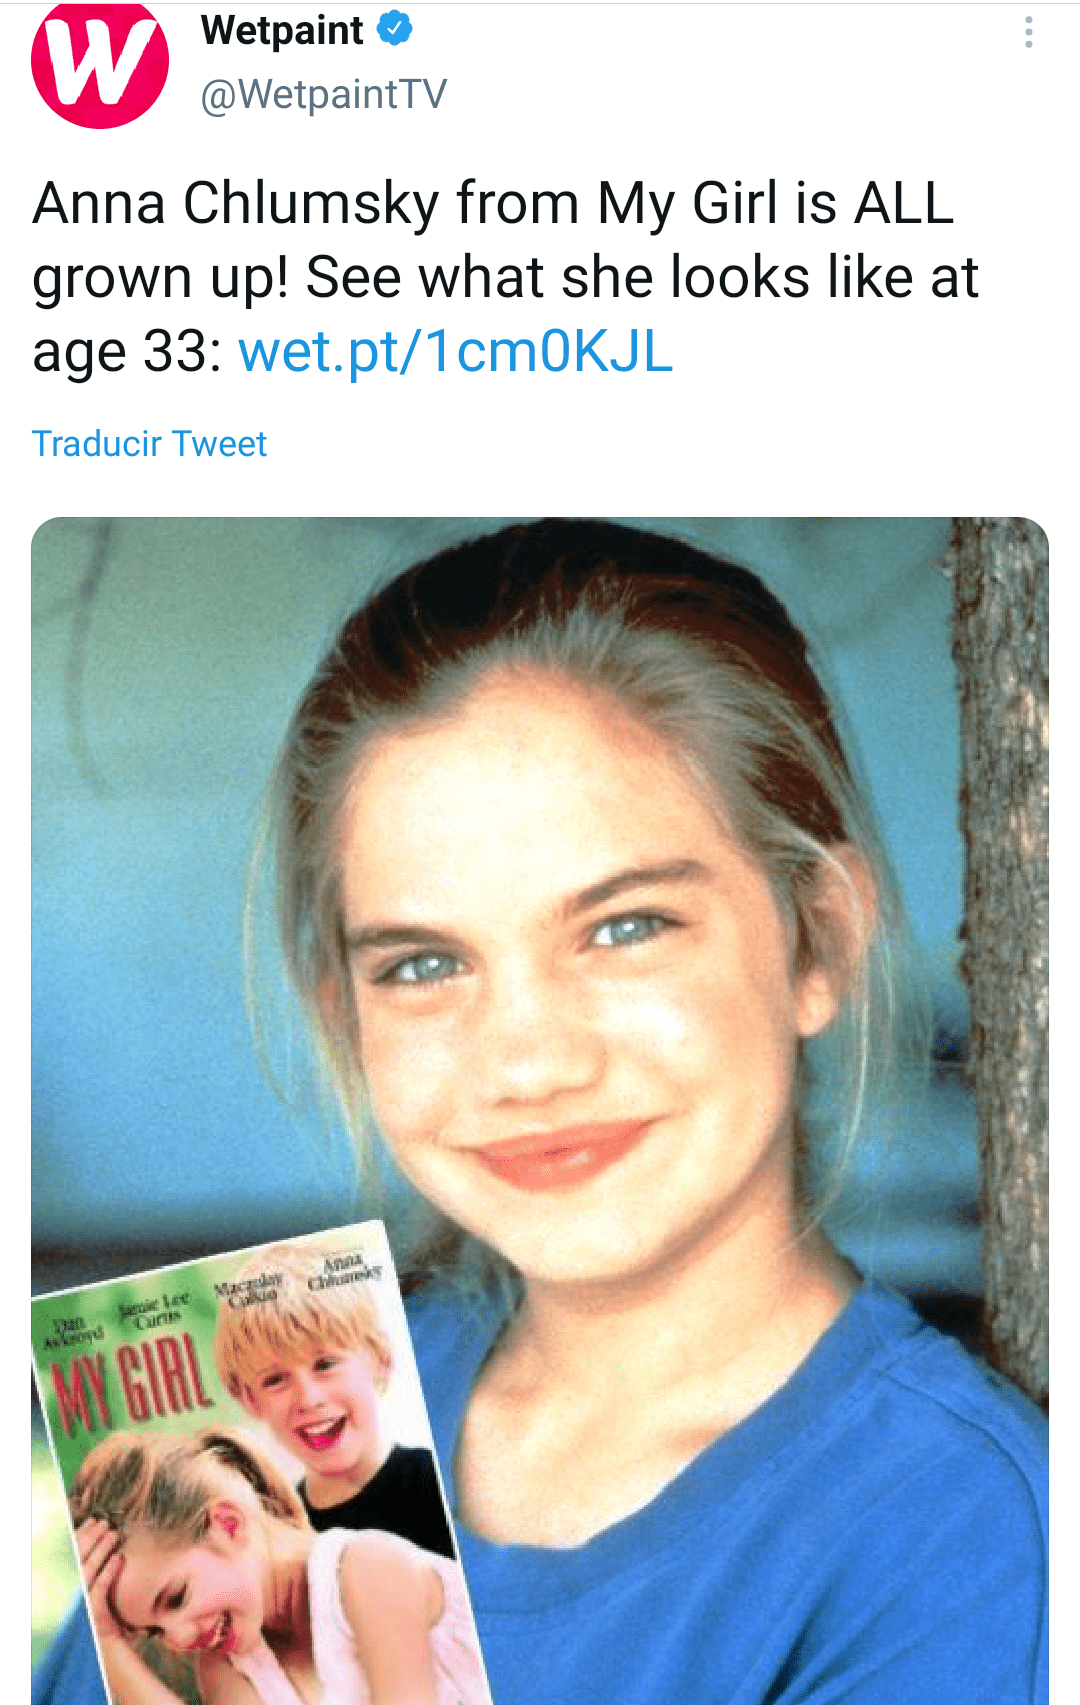 Anna Chlumsky as a young child | Photo: Twitter/Wetpaint